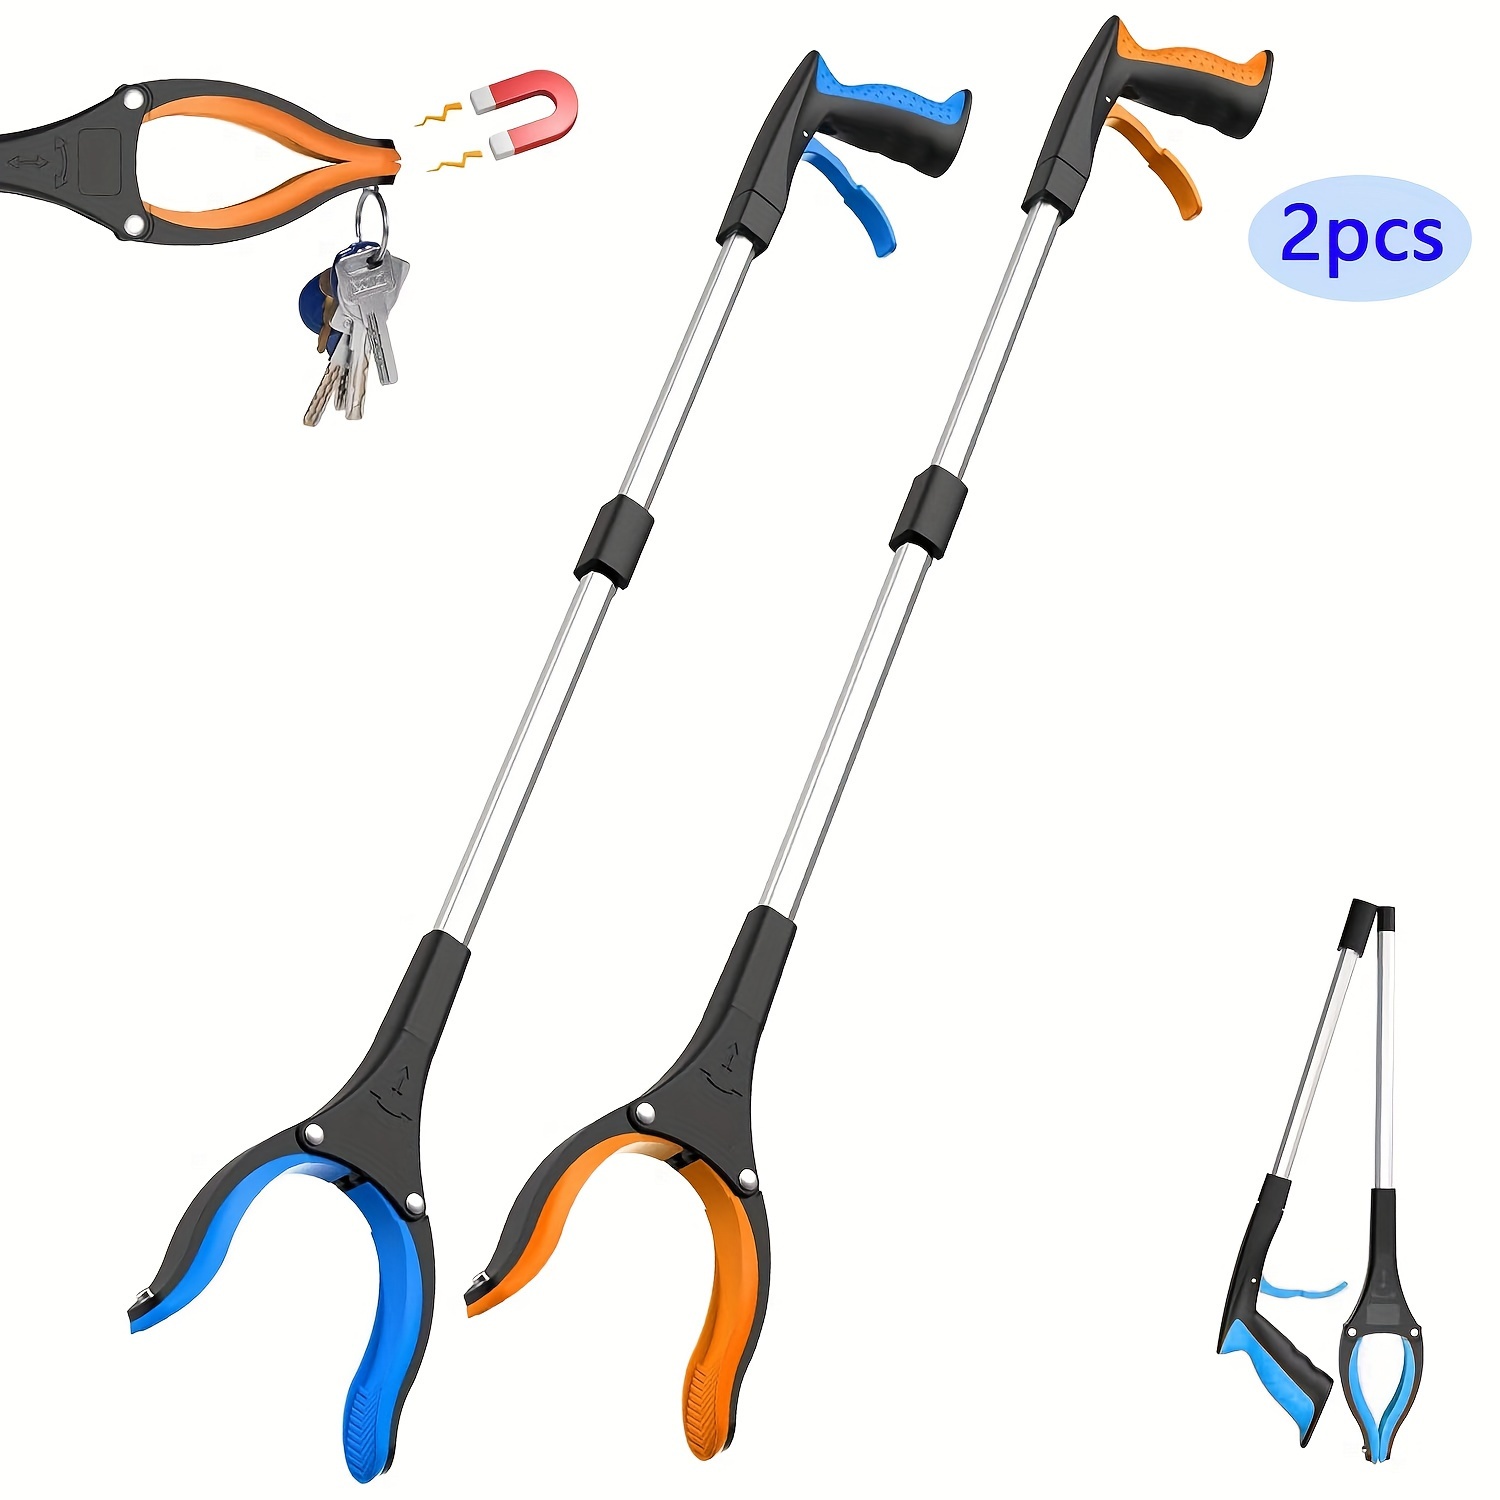 

2-pack 33" Tools With Magnetic Tip, Aluminum Lightweight Trash Claw Pickers, High Load Capacity Mobility Aid For Elderly, Extended Arm Litter Picker Tools